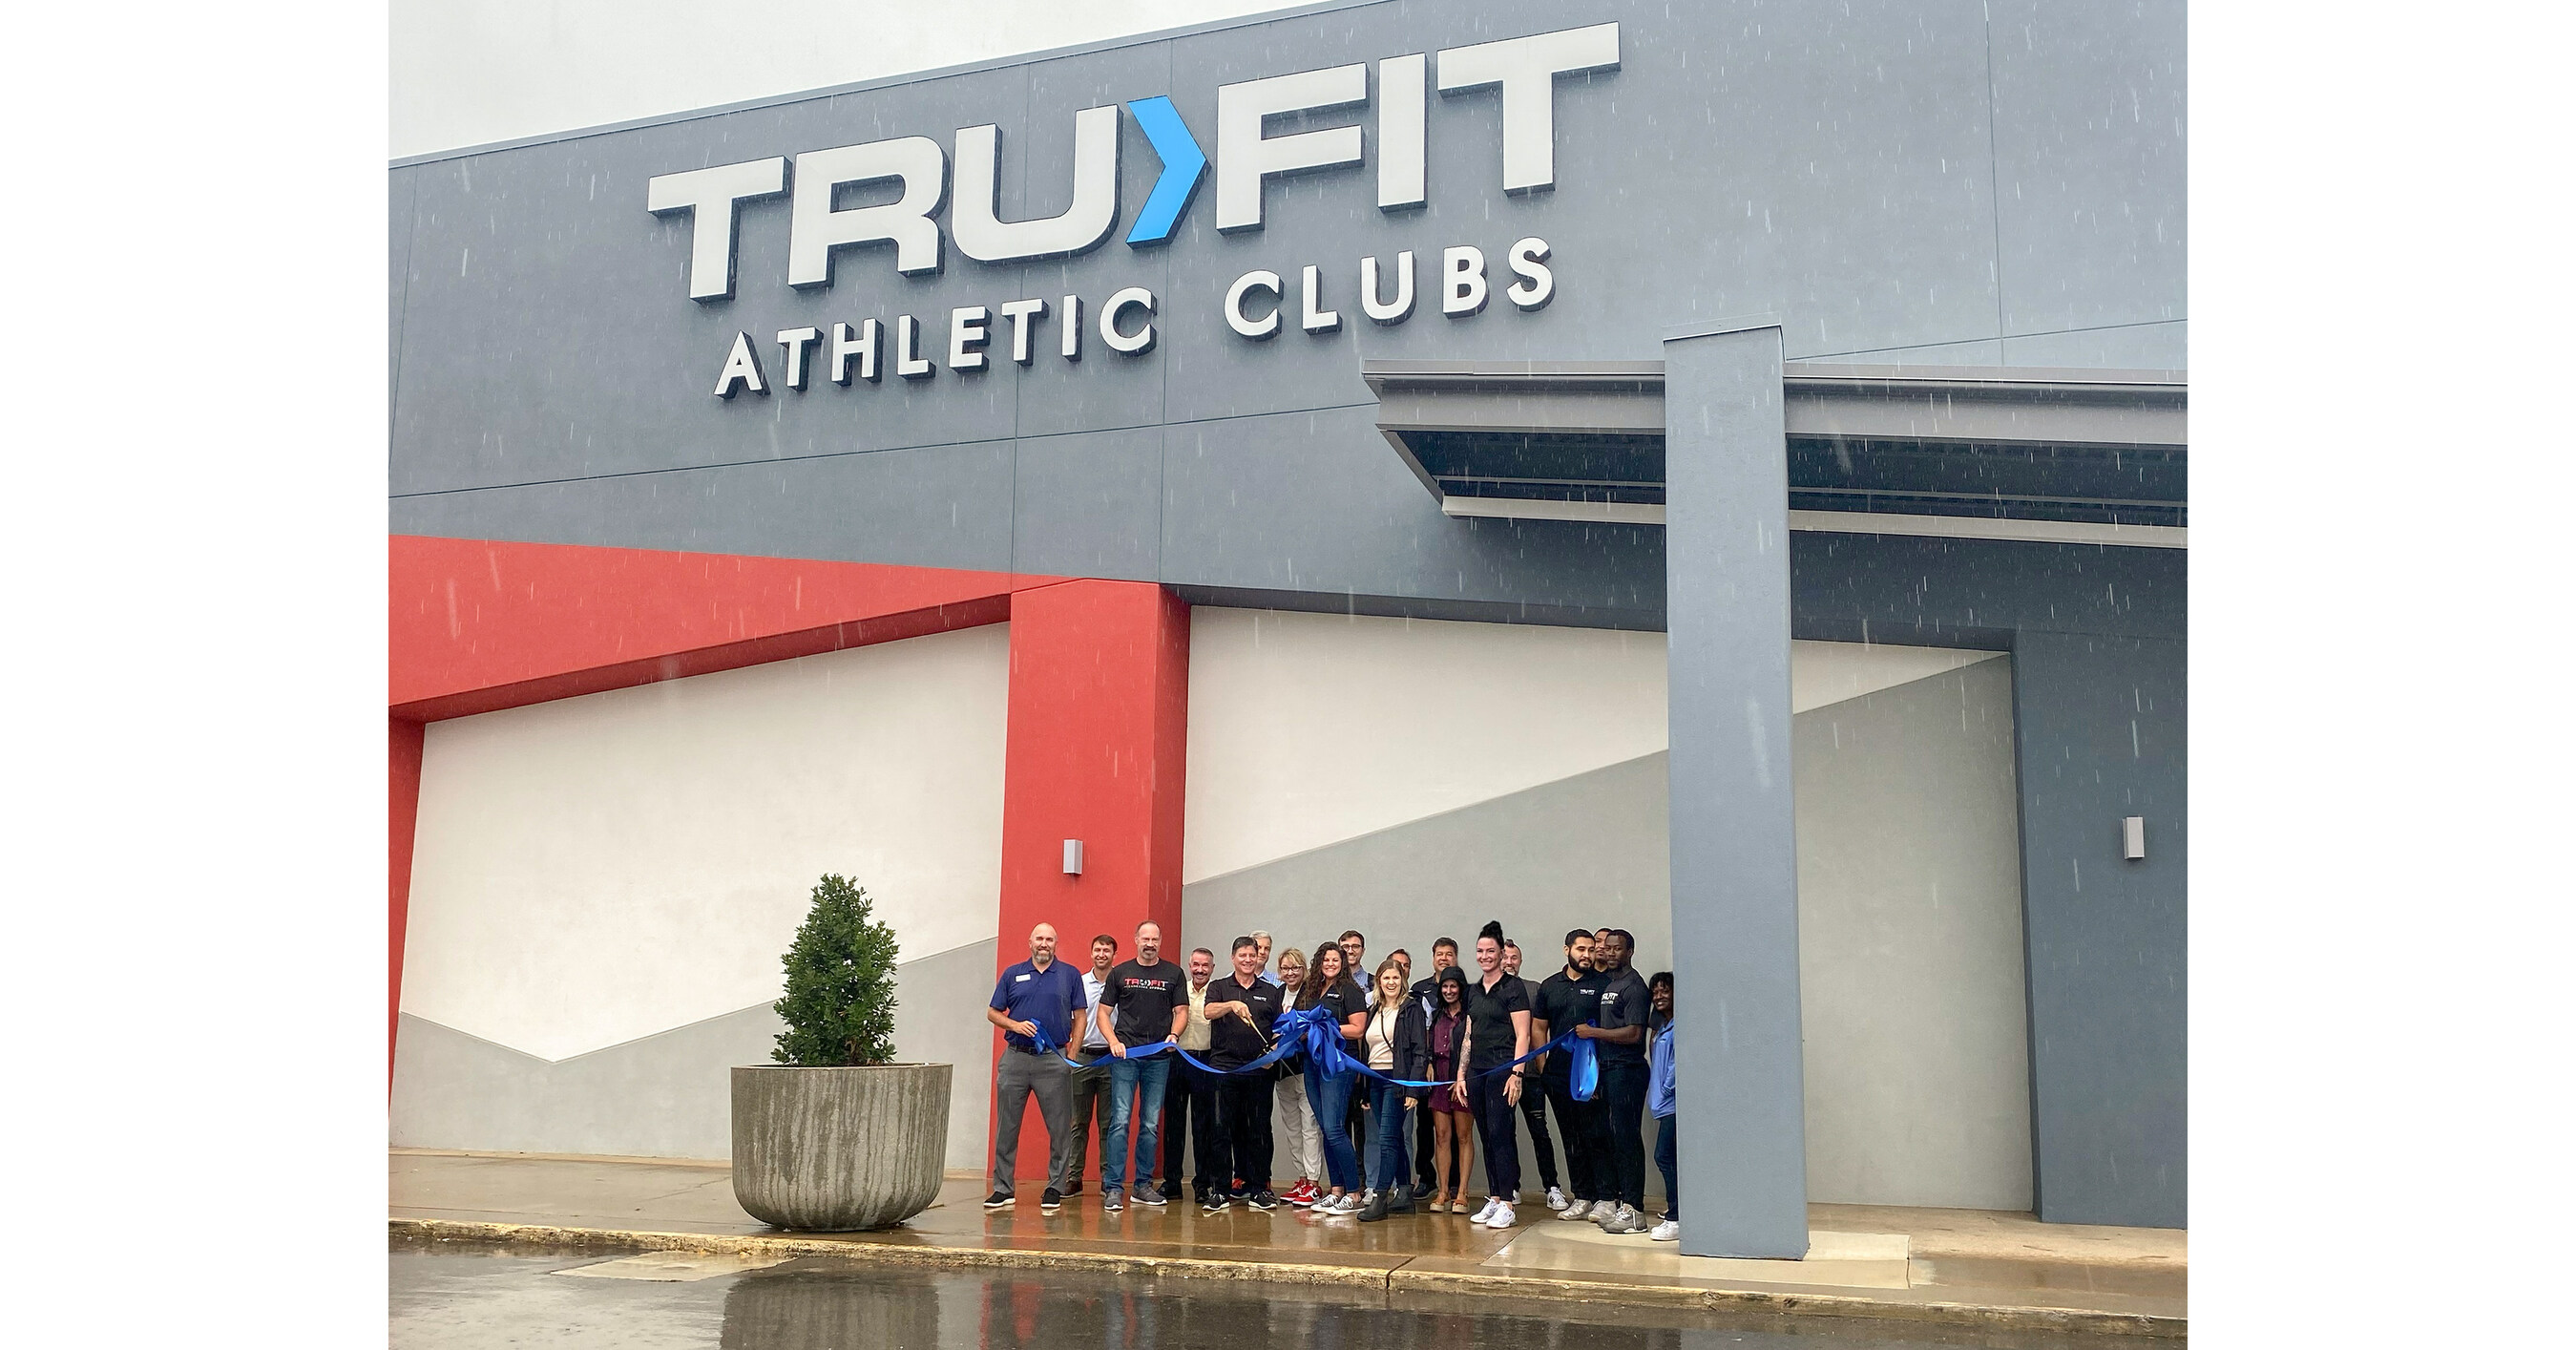 TEXAS FITNESS GIANT, TRUFIT ATHLETIC CLUBS, TAKES TENNESSEE MARKETS ON AS  THE COMPANY CONTINUES TO GROW WHILE EMBRACING COMMUNITY PARTNERSHIPS